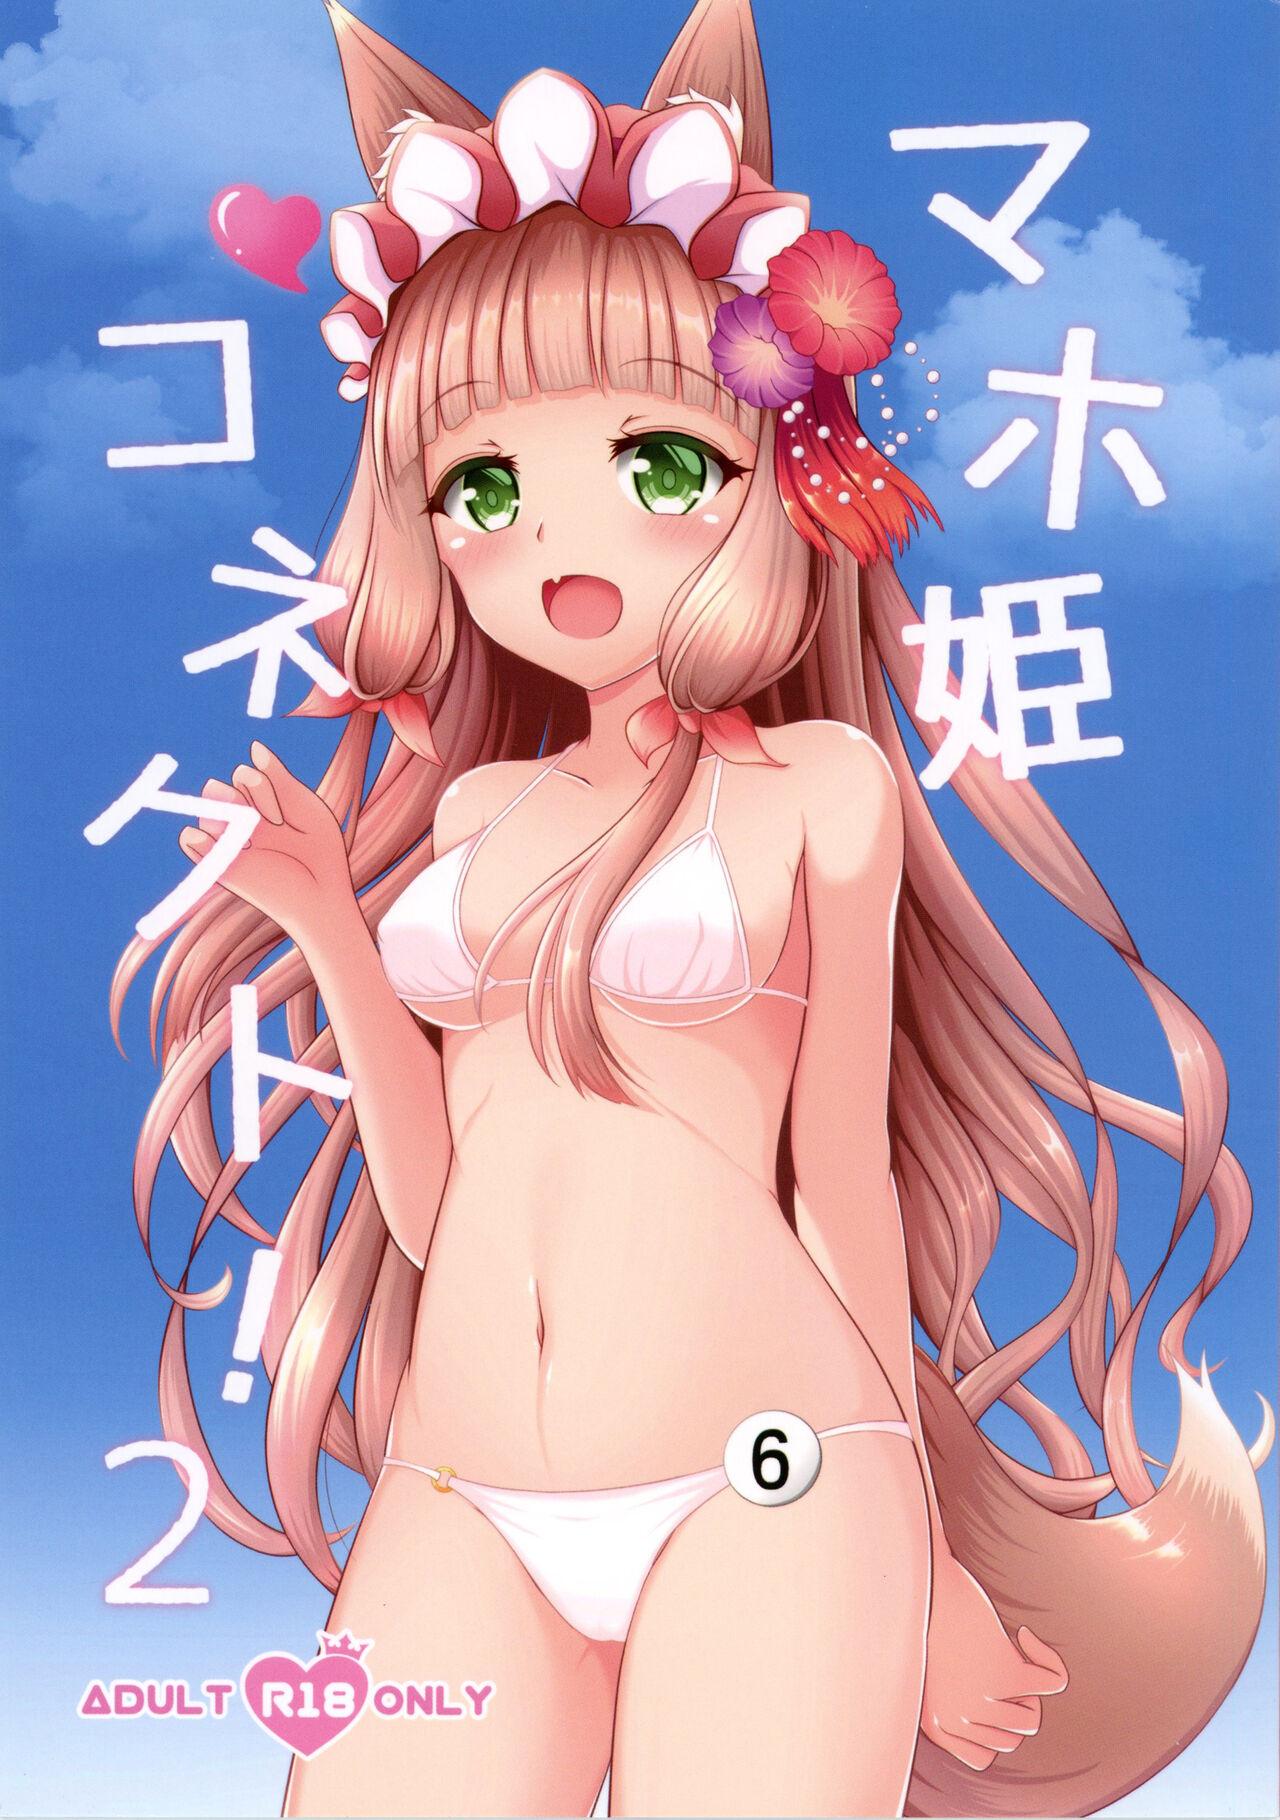 Holes Maho Hime Connect! 2 - Princess connect Oil - Picture 1